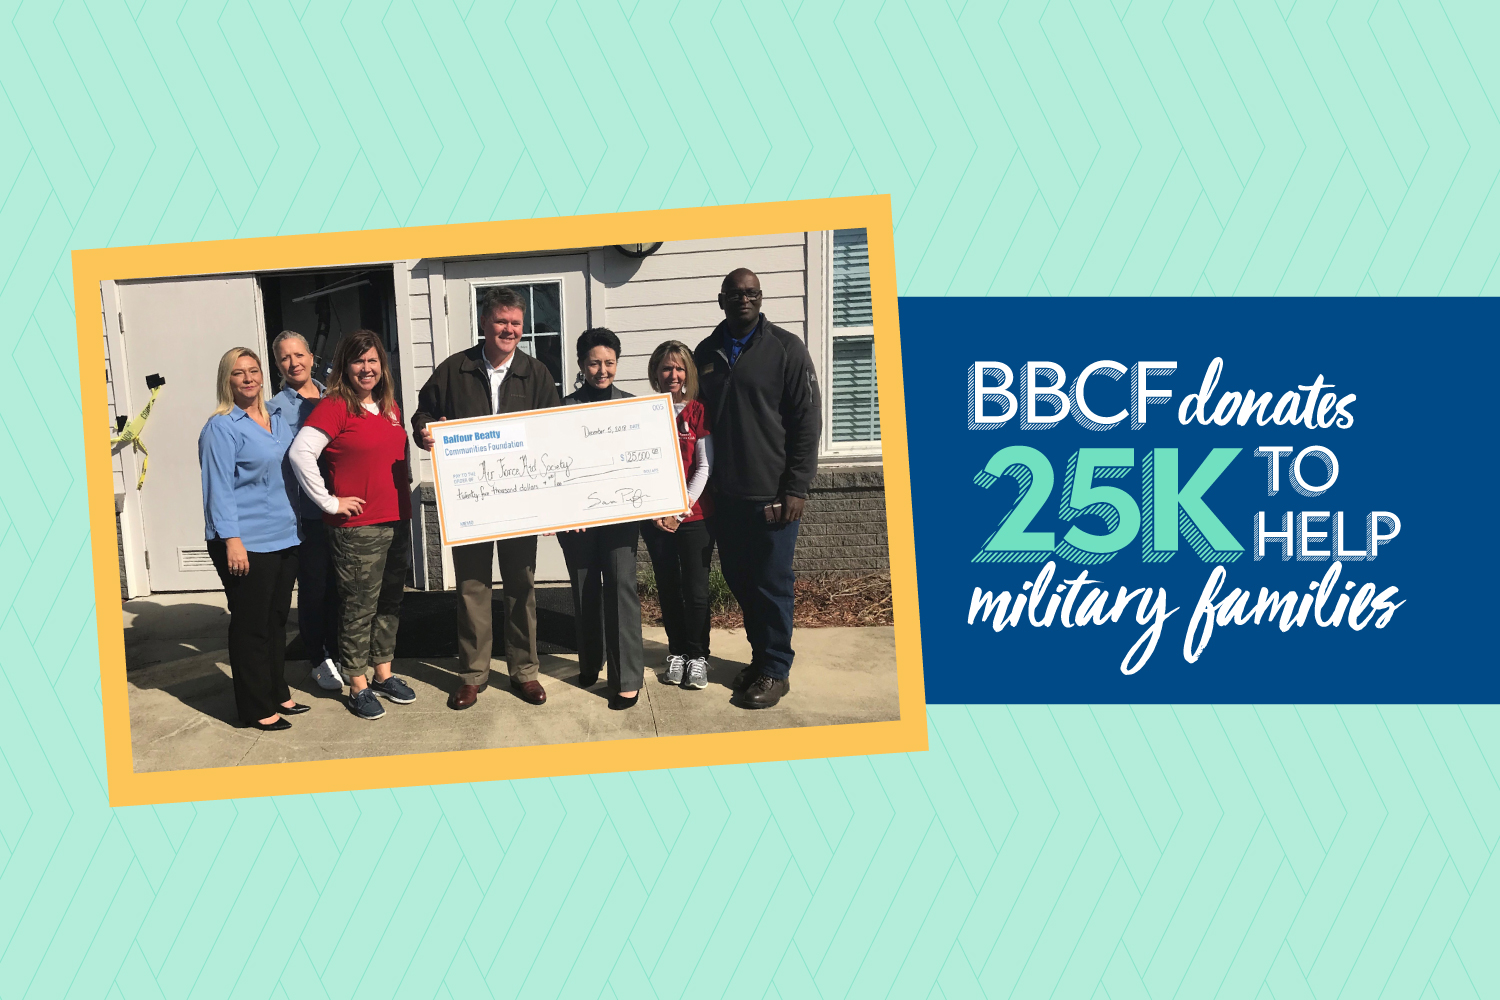 Balfour Beatty Communities Foundation donates $25,000 to help military families at Tyndall Air Force Base following Hurricane Michael